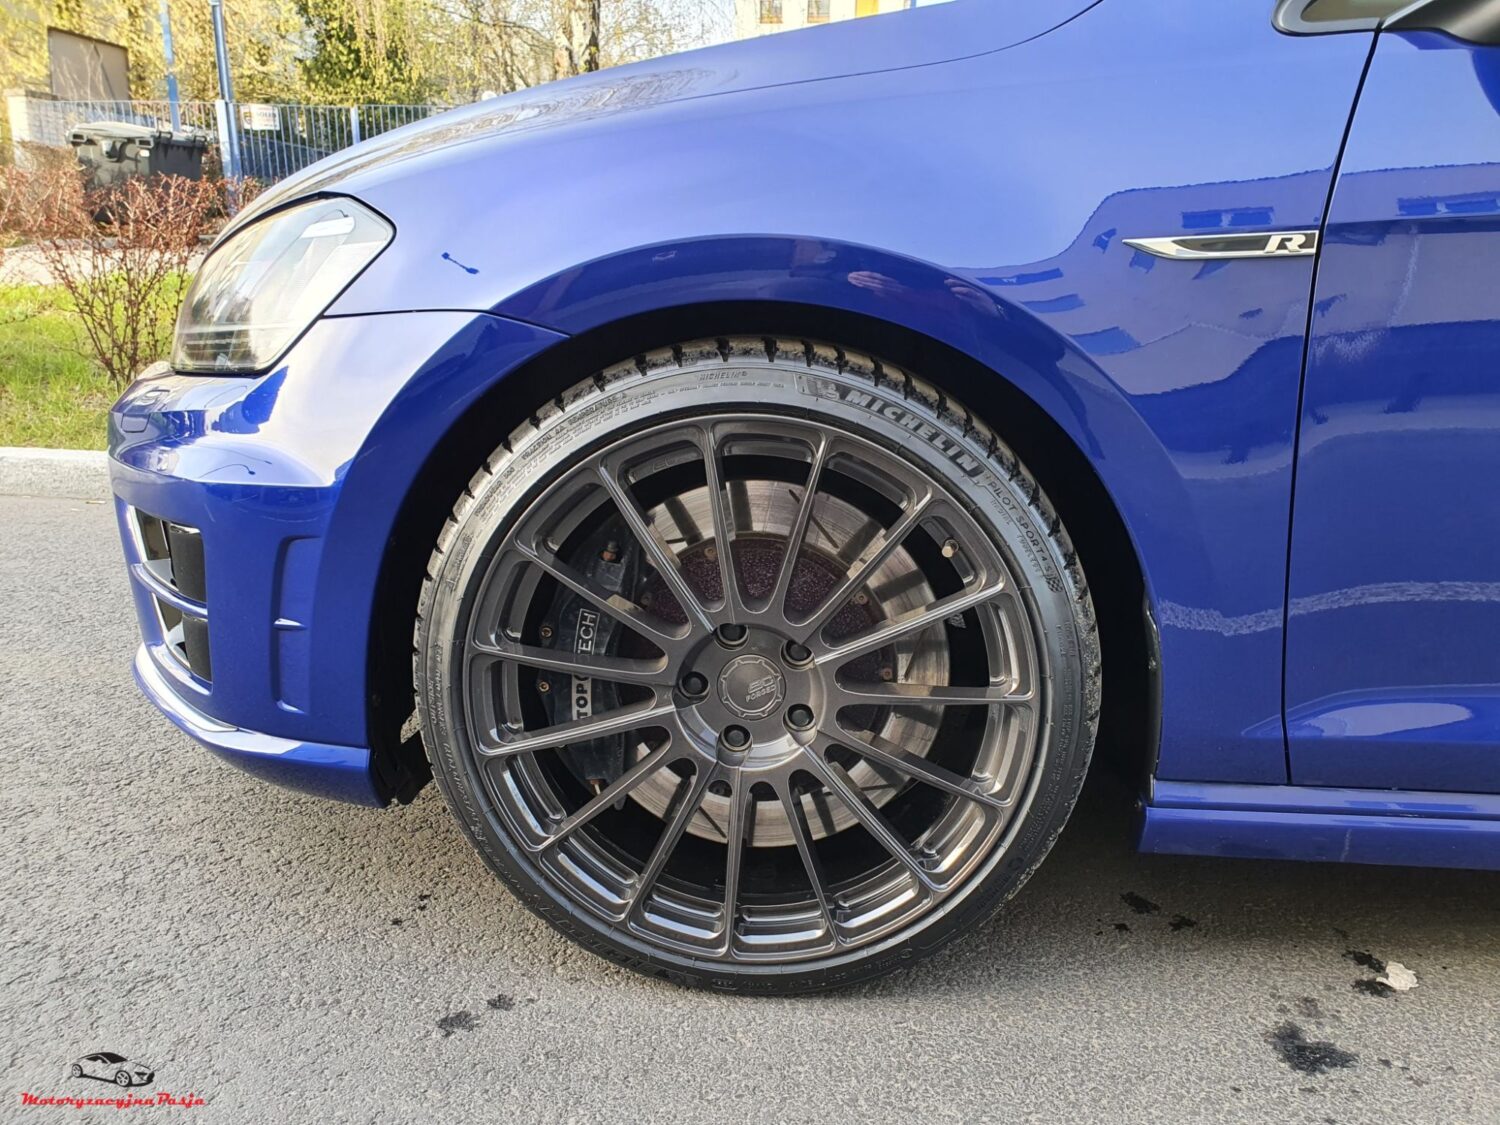 Volkswagen Golf R 7 with 19×8.5-inch BC Forged RZ15